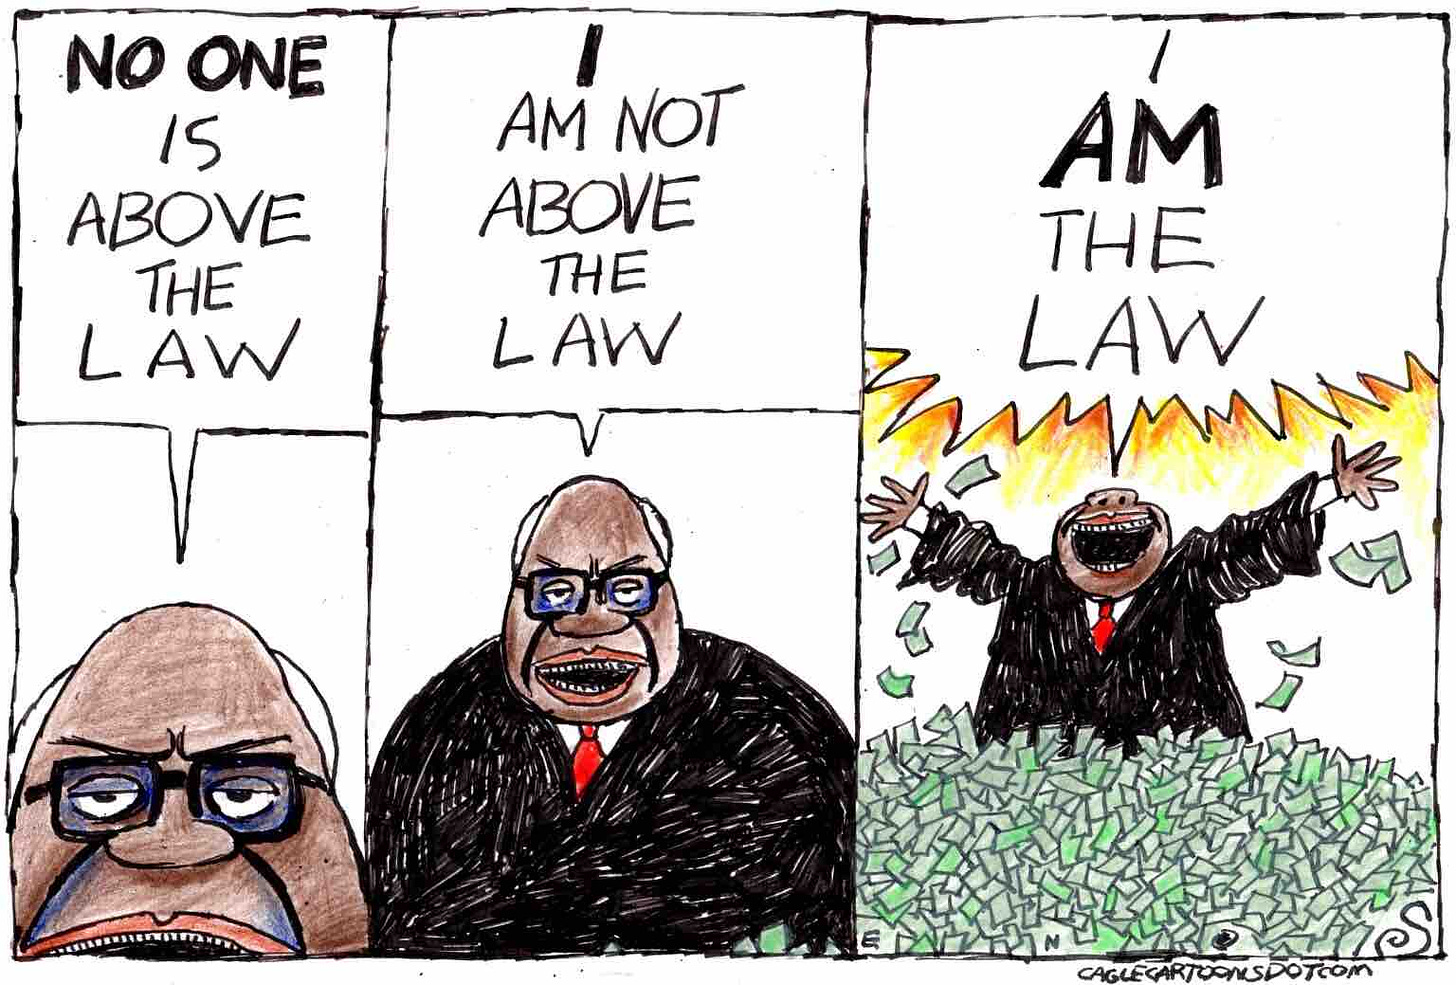 Clarence Thomas believes he is above the law